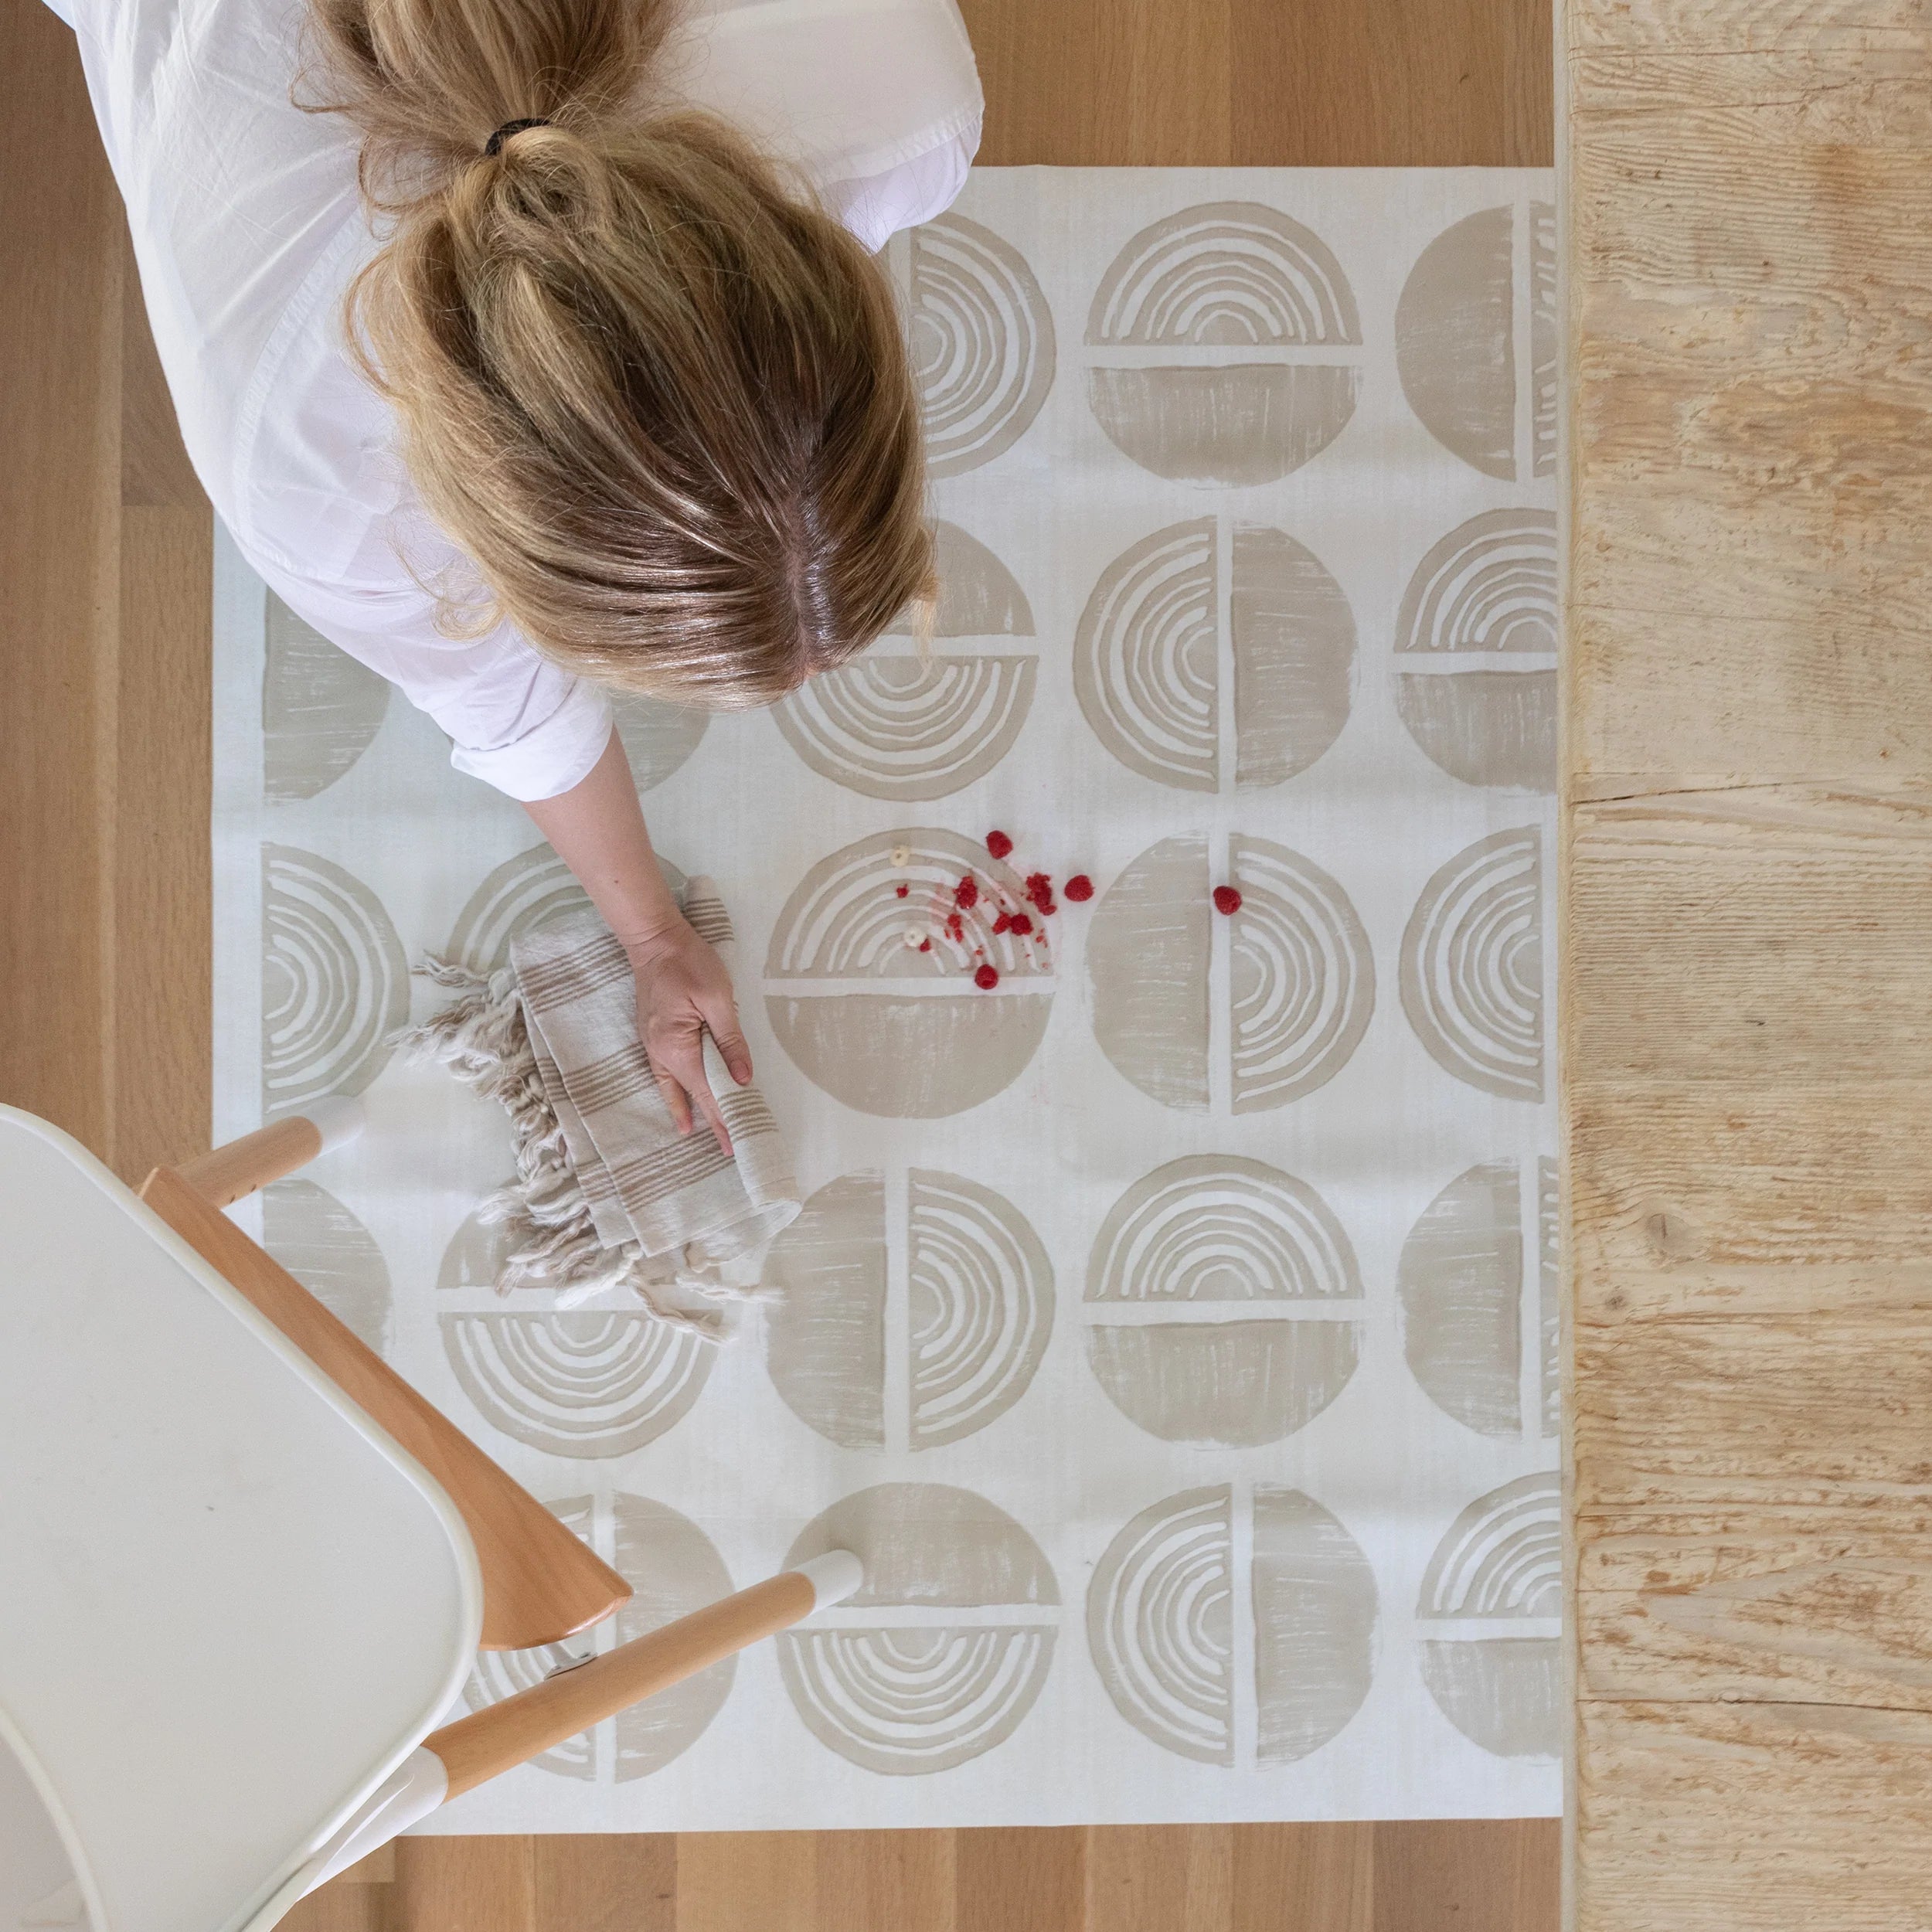 Ada modern minimalist baby high chair mat in Pebble taupe and off white. Shown from above with woman cleaning up a spill under a high chair.